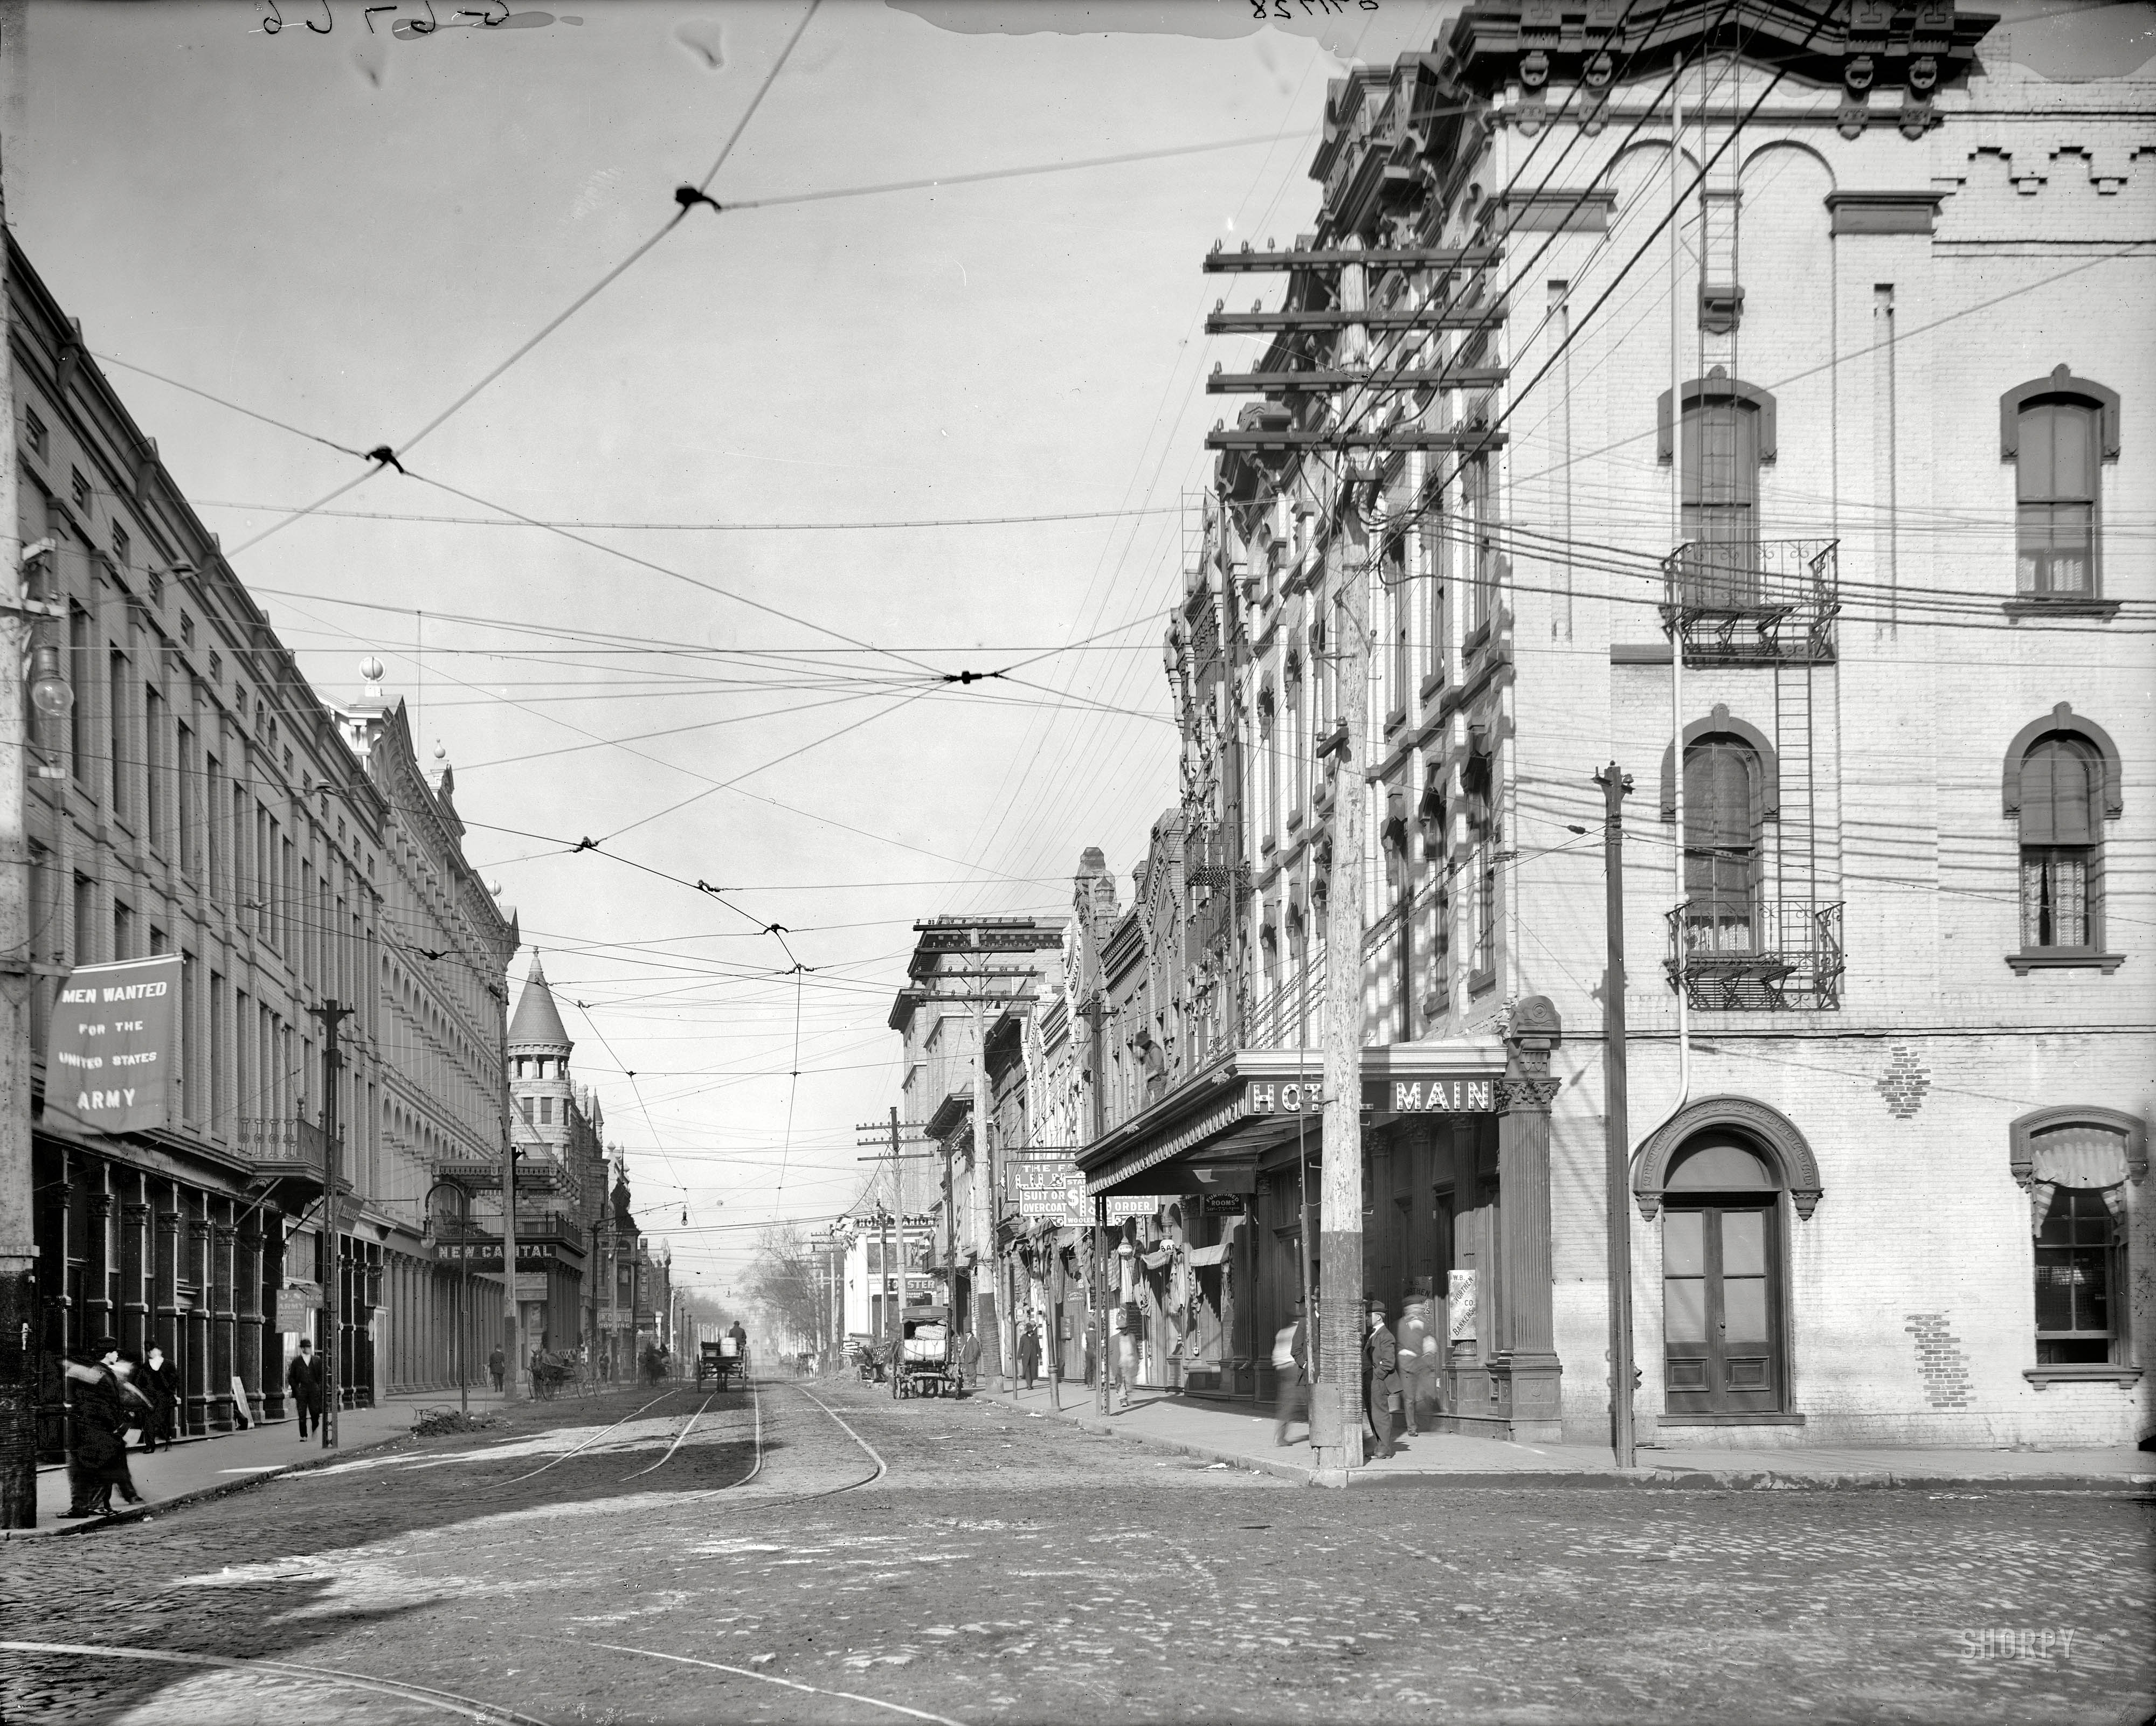 Wrapping up our tour of Little Rock, Arkansas, circa 1910. "Markham Street west from Main." Detroit Publishing Company glass negative. View full size.